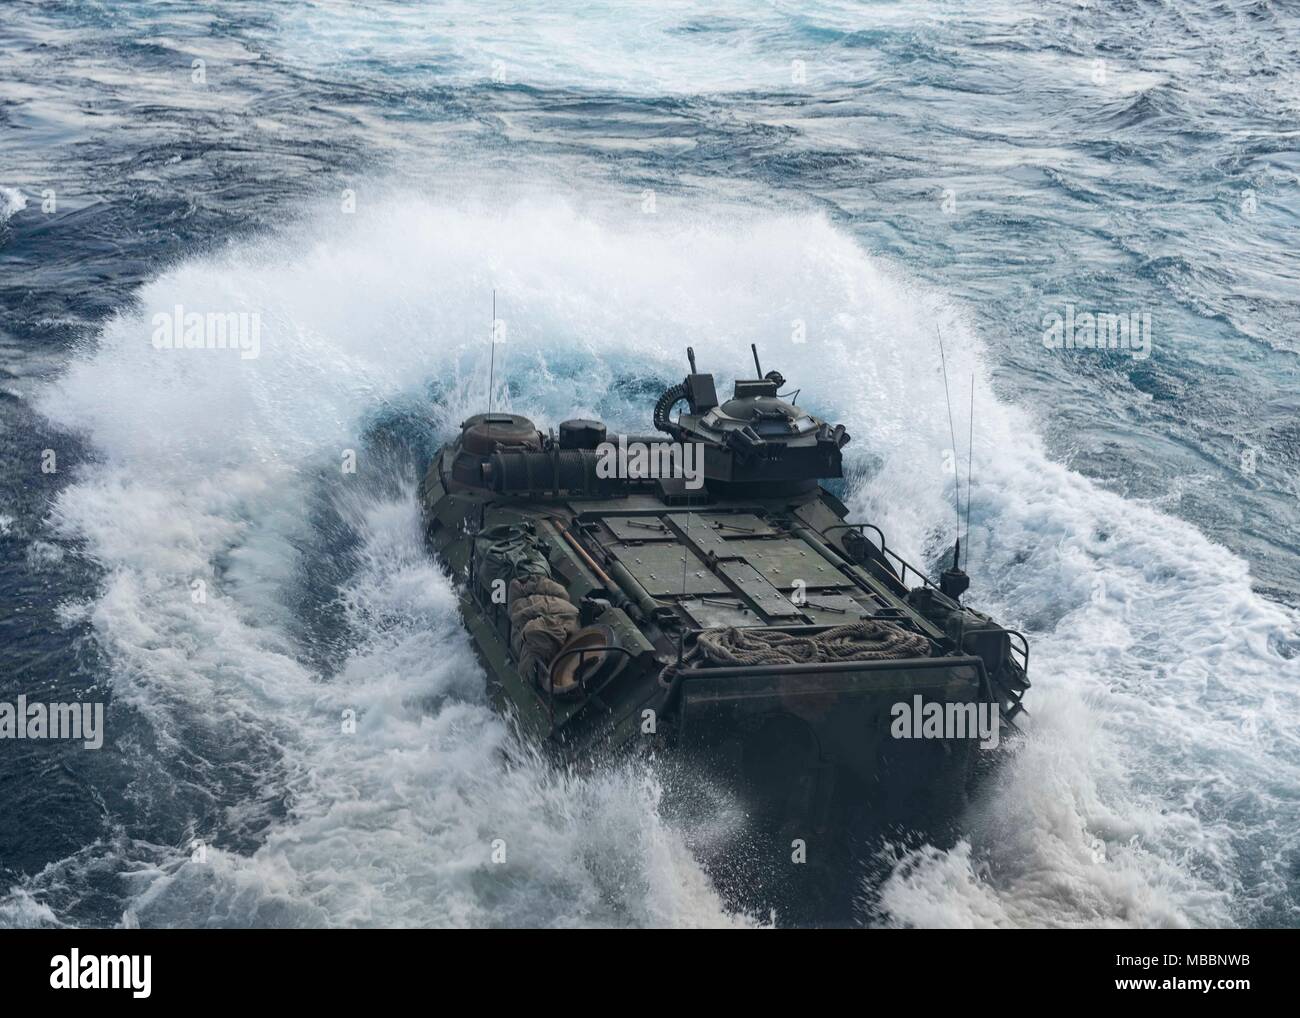 180402-N-TJ319-0195 U.S. 5TH FLEET AREA OF OPERATIONS (April 2, 2018) An AAV-P7/A1 assault amphibious vehicle, attached to the 26th Marine Expeditionary Unit, disembarks the well deck of the Harpers Ferry-class dock landing ship USS Oak Hill (LSD 51) April 2, 2018, in preparation to begin Alligator Dagger. Led by Naval Amphibious Force, Task Force 51/5th Marine Expeditionary Brigade, Alligator Dagger integrates U.S. Navy and Marine Corps assets to practice and rehearse a range of critical combat-related capabilities available to U.S. Central Command both afloat and ashore to promote stability  Stock Photo